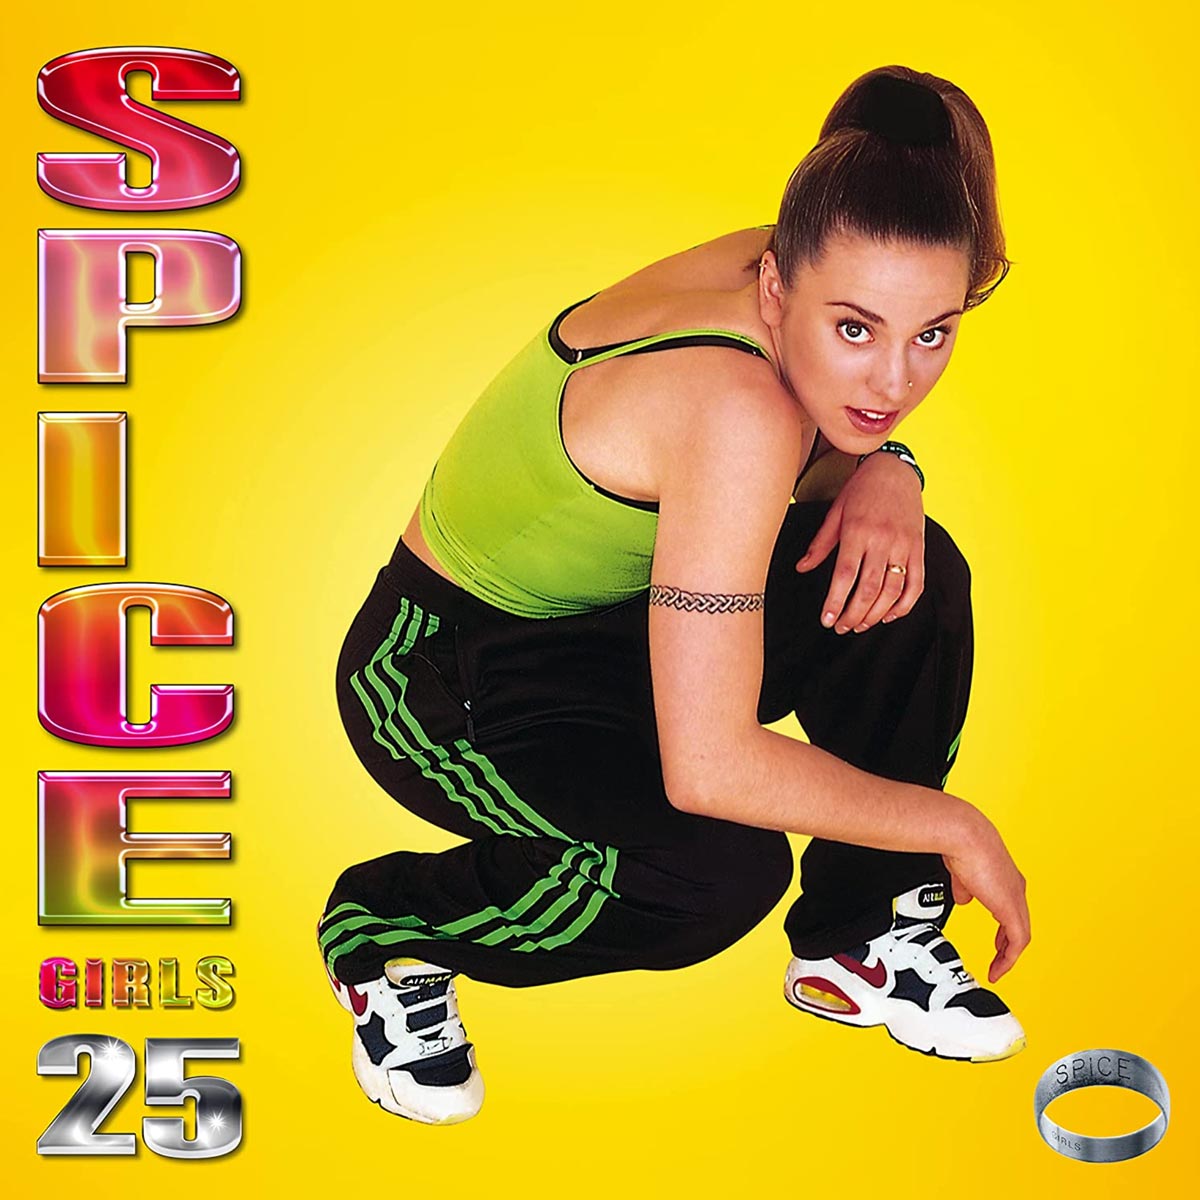 Spice-Girls---Spice-25th-Anniversary-Sporty-Yellow